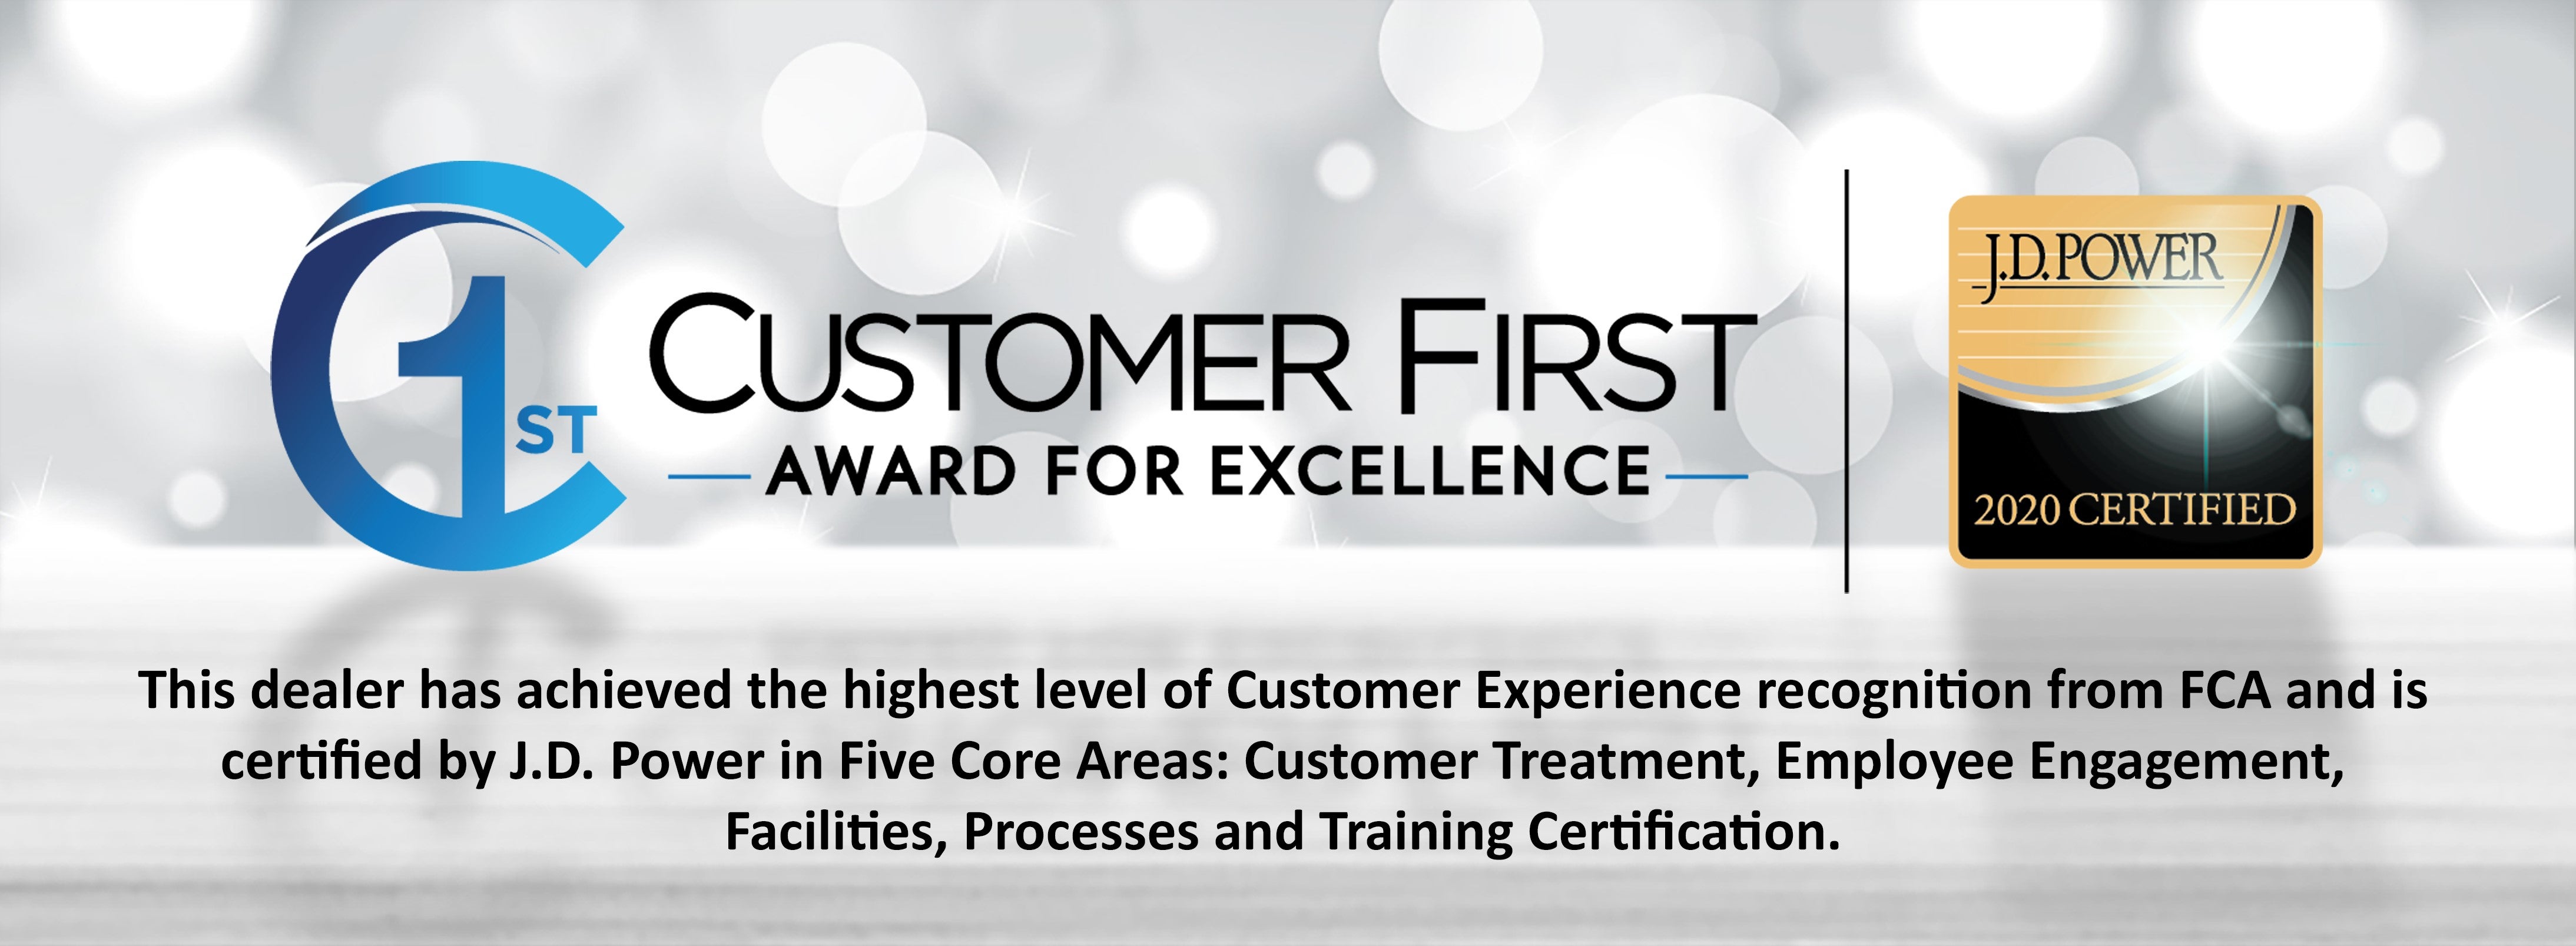 Customer First Award for Excellence for 2019 at Bayou Chrysler Dodge Jeep Ram in LaPlace, LA